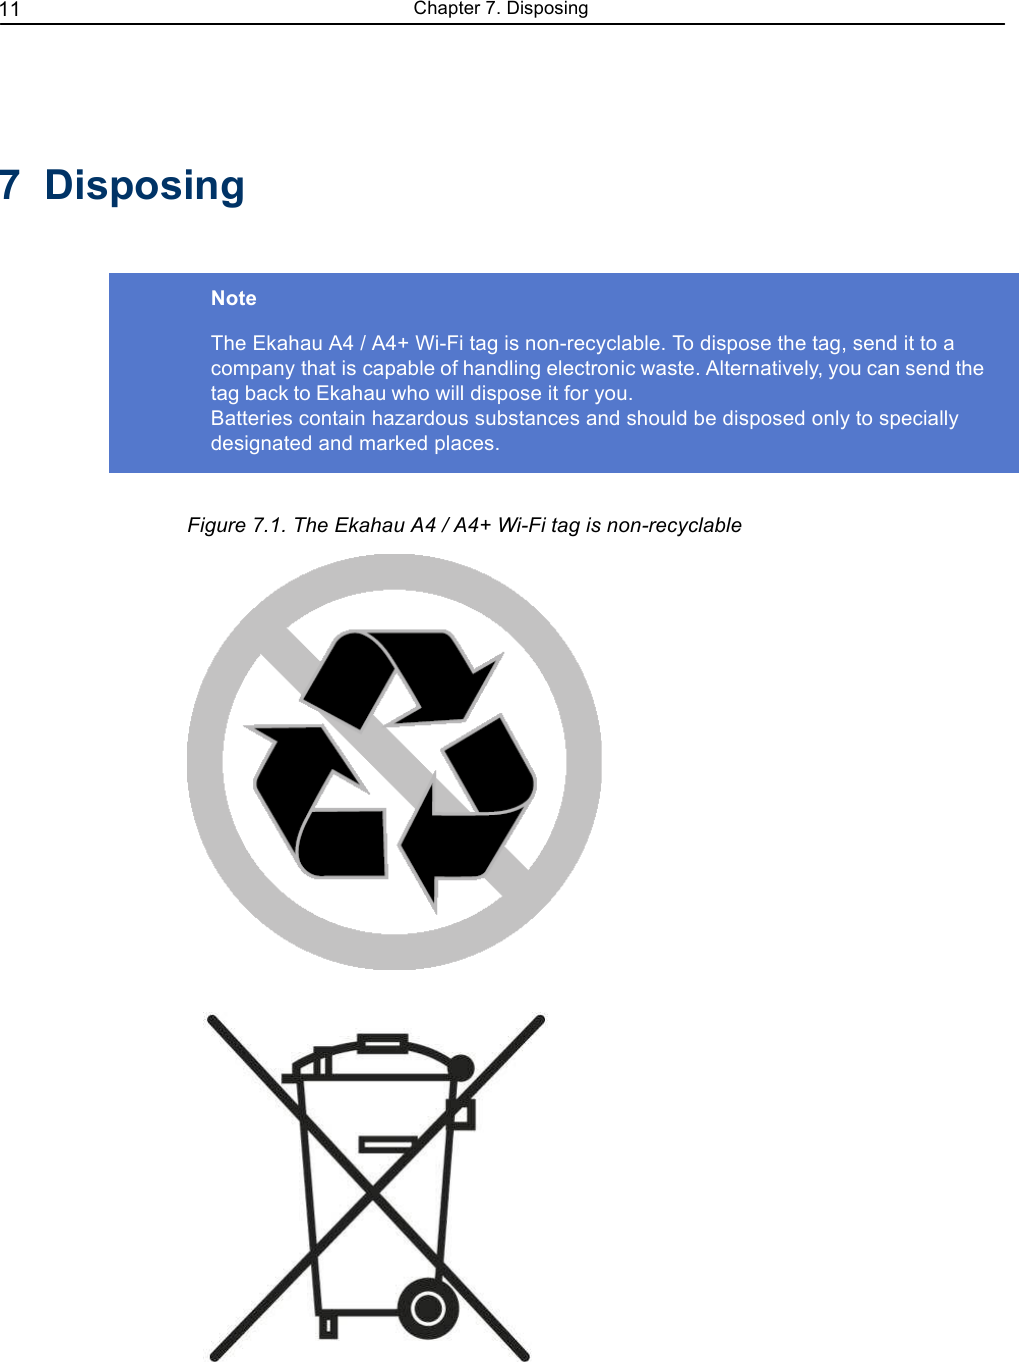 11 Chapter 7. Disposing7  DisposingNoteThe Ekahau A4 / A4+ Wi-Fi tag is non-recyclable. To dispose the tag, send it to a company that is capable of handling electronic waste. Alternatively, you can send thetag back to Ekahau who will dispose it for you.Batteries contain hazardous substances and should be disposed only to specially designated and marked places. Figure 7.1. The Ekahau A4 / A4+ Wi-Fi tag is non-recyclable